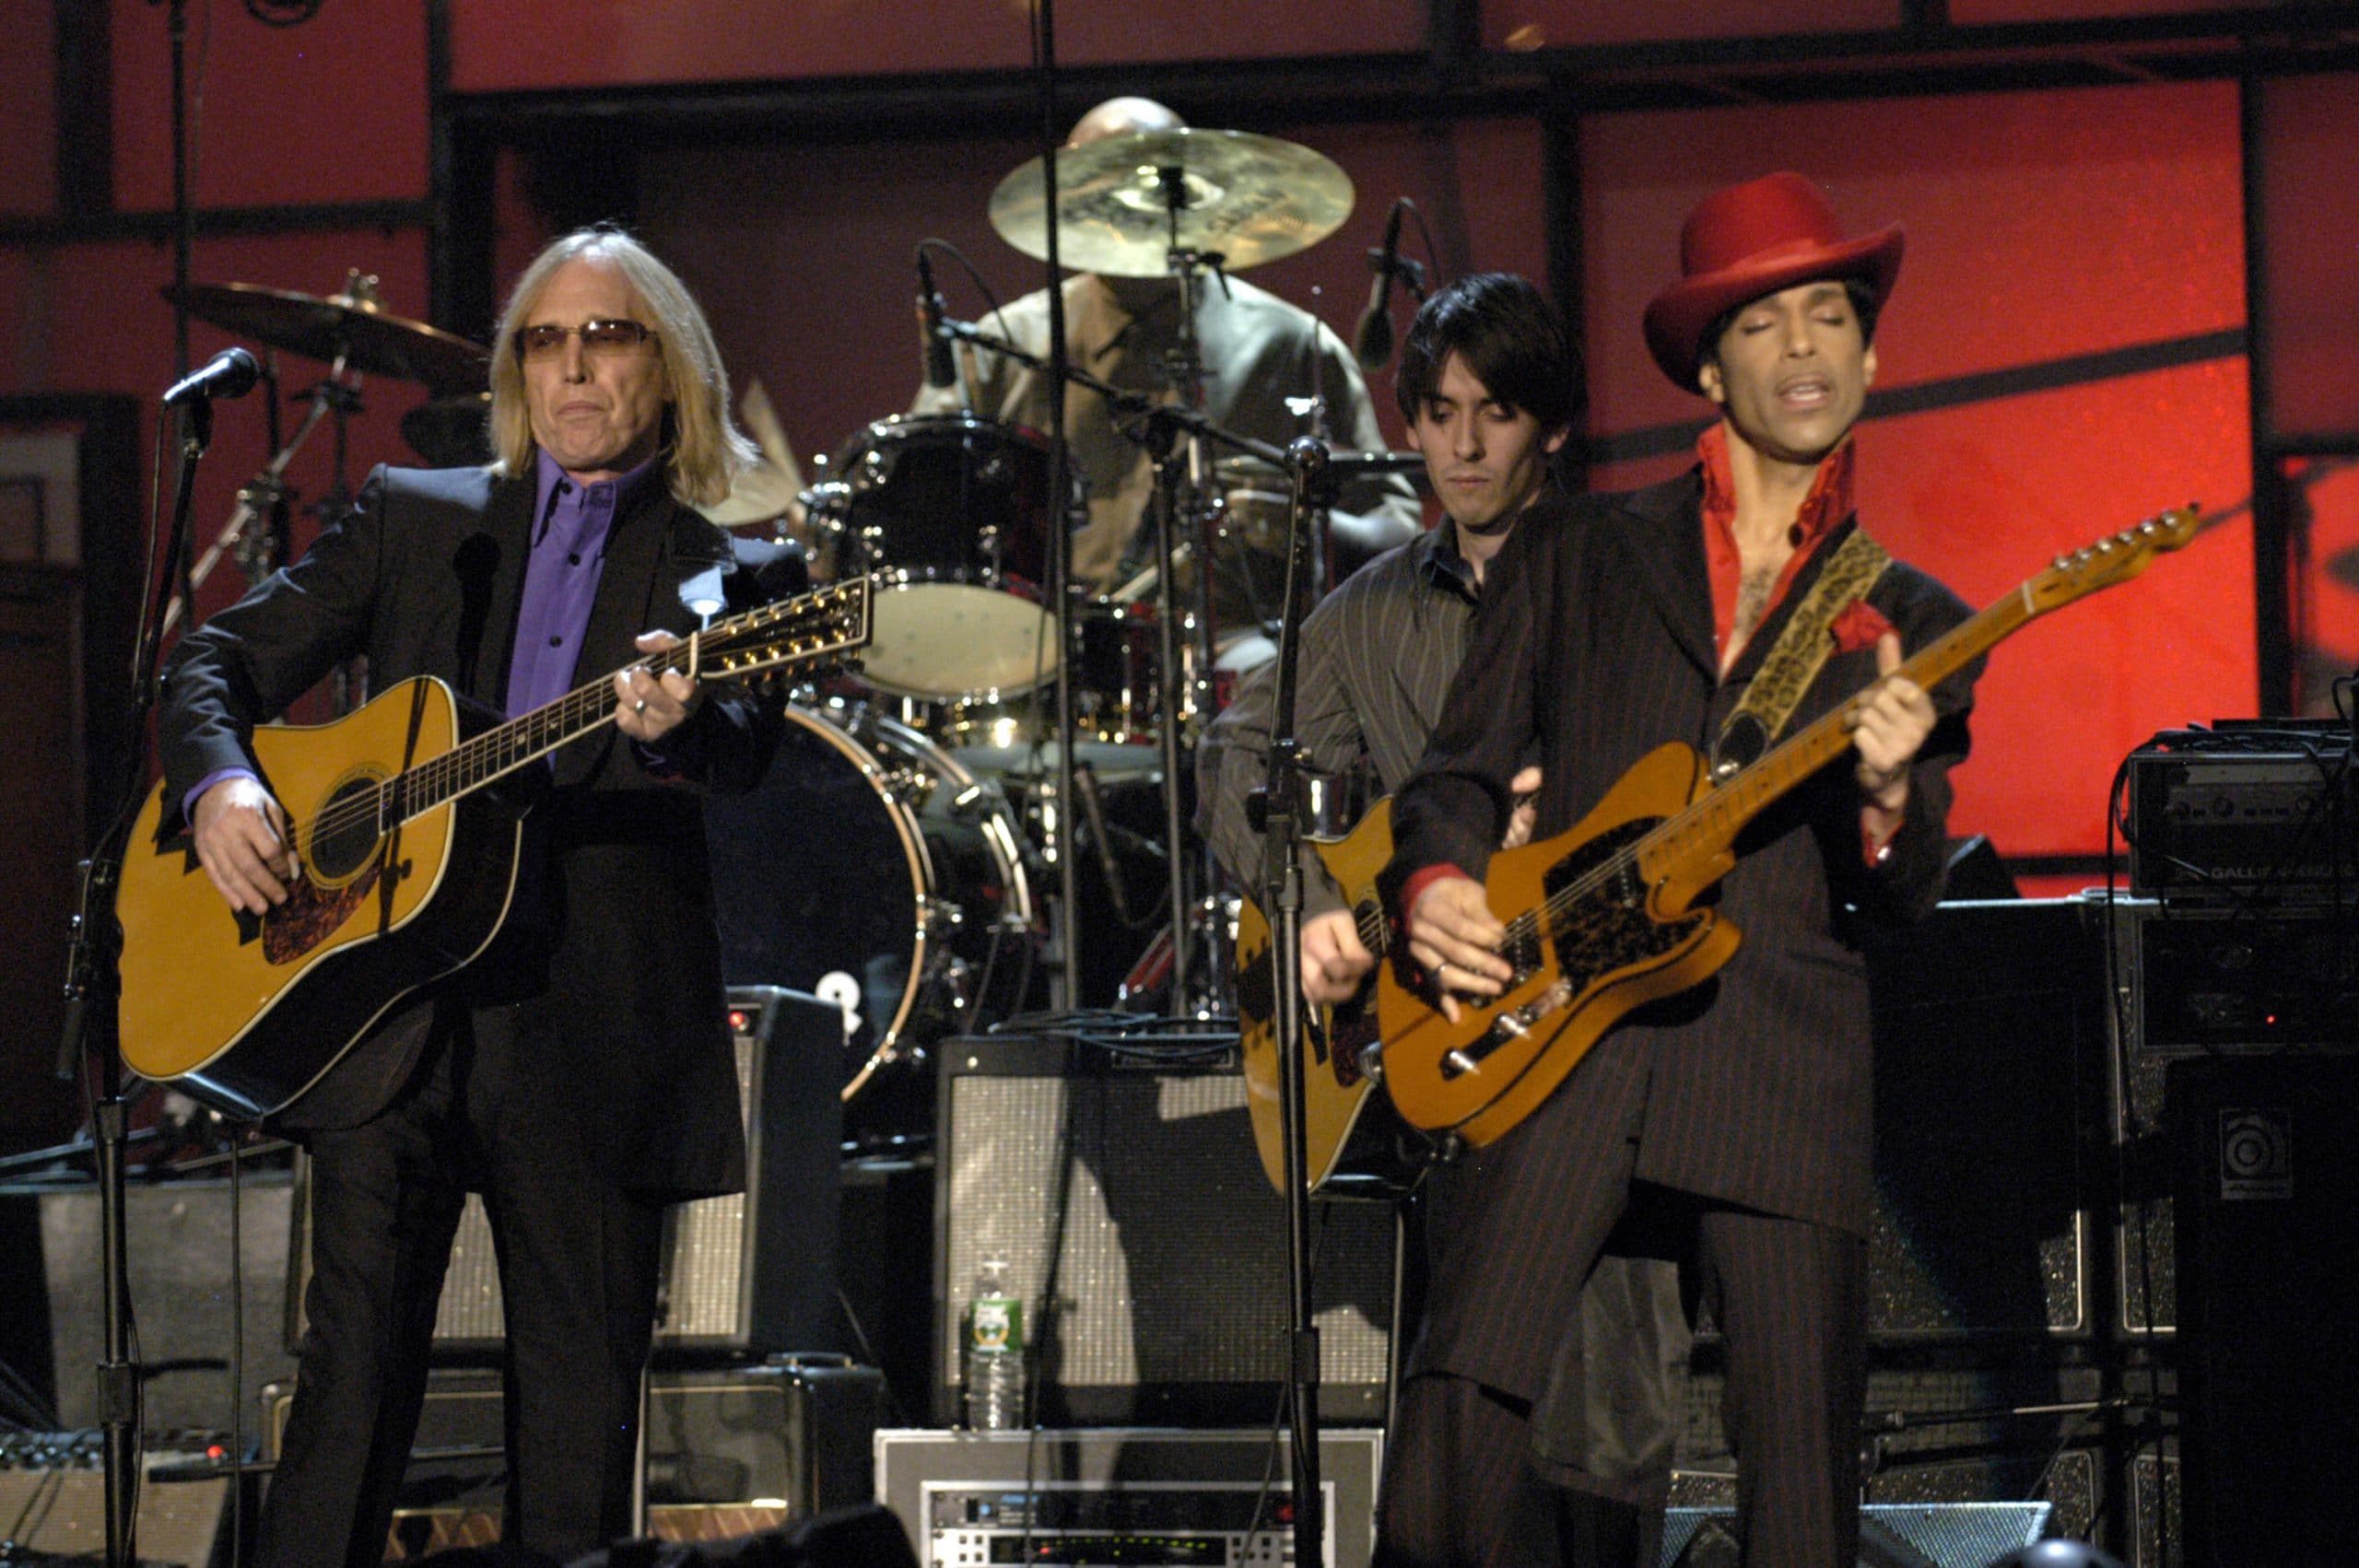 tom petty and prince perform together